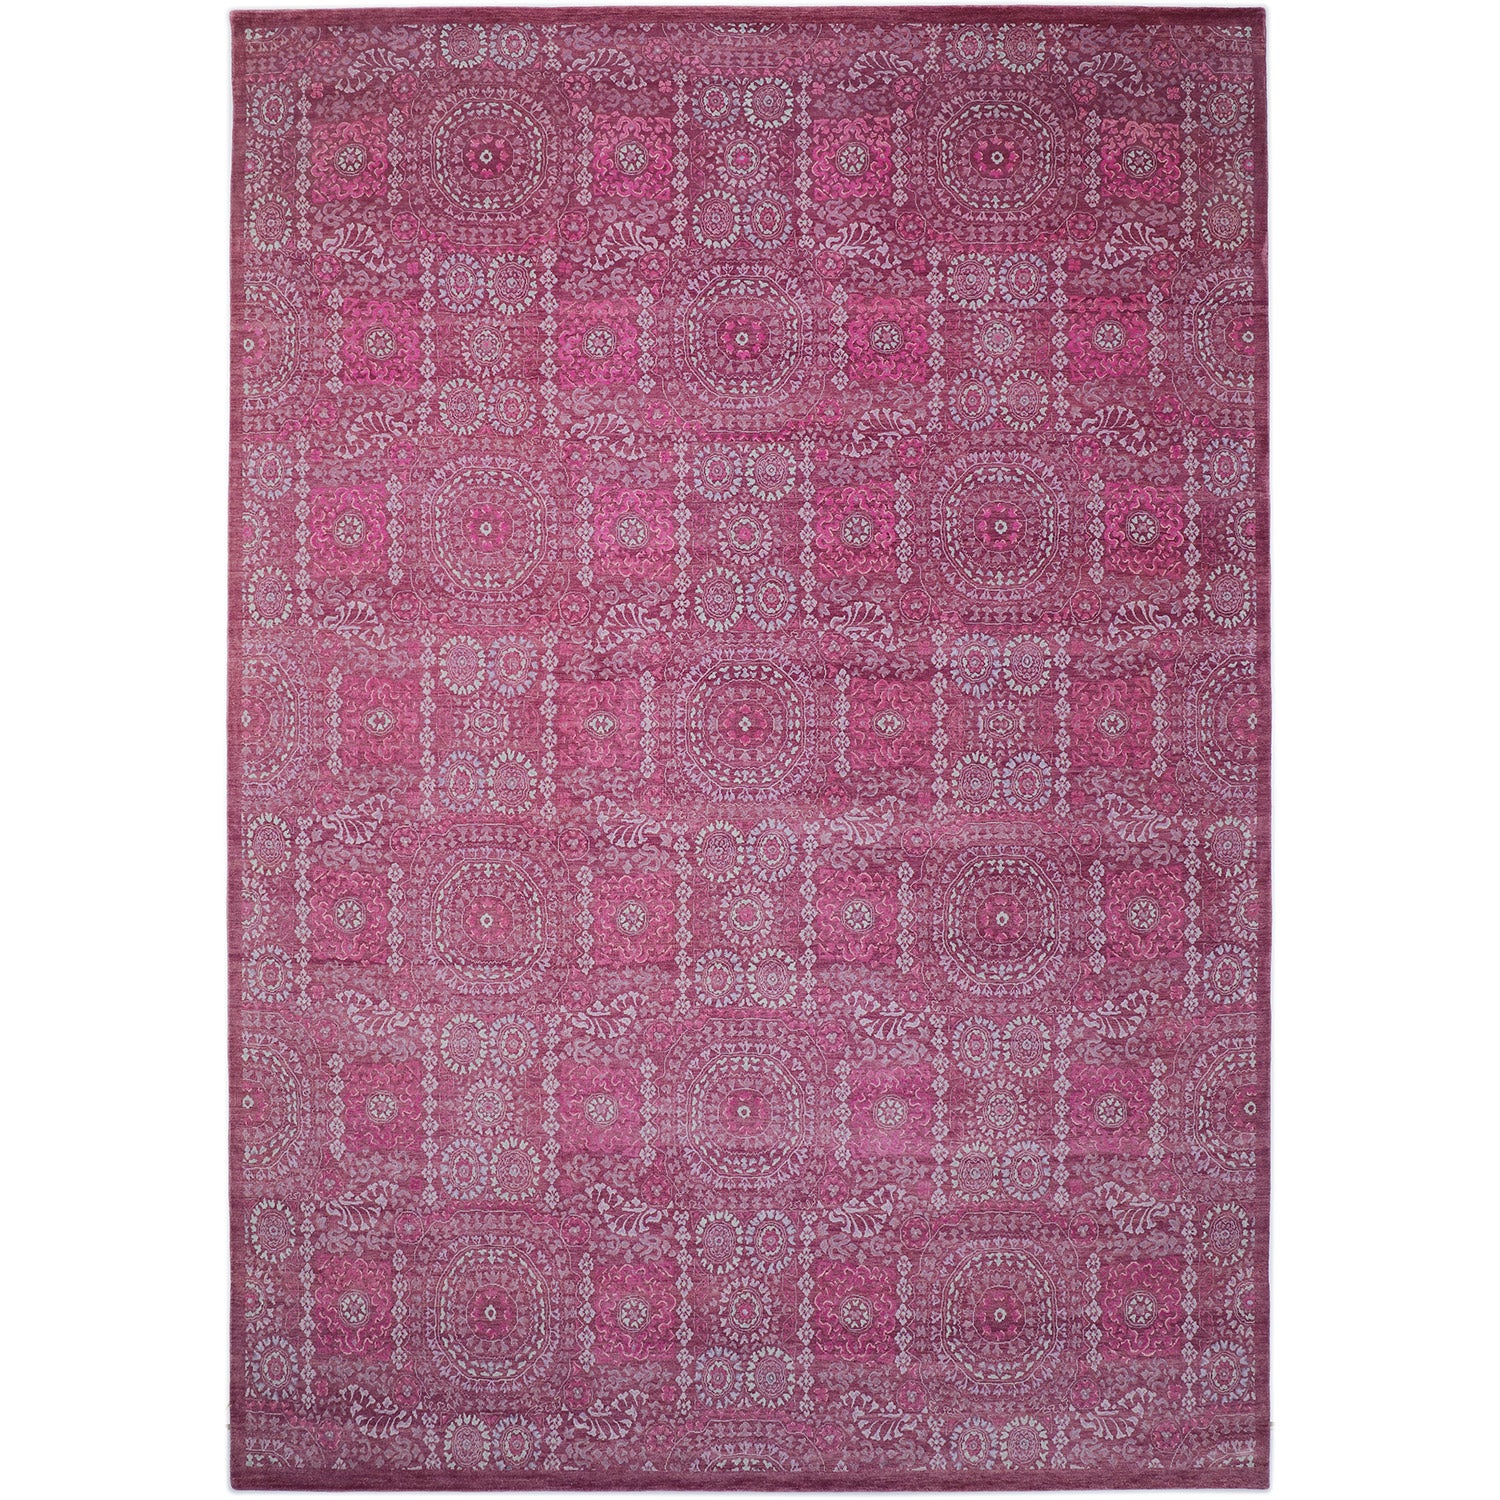 One-of-a-Kind, Hand-Knotted Area Rug - Burgundy 10'2" x 14'4" Default Title